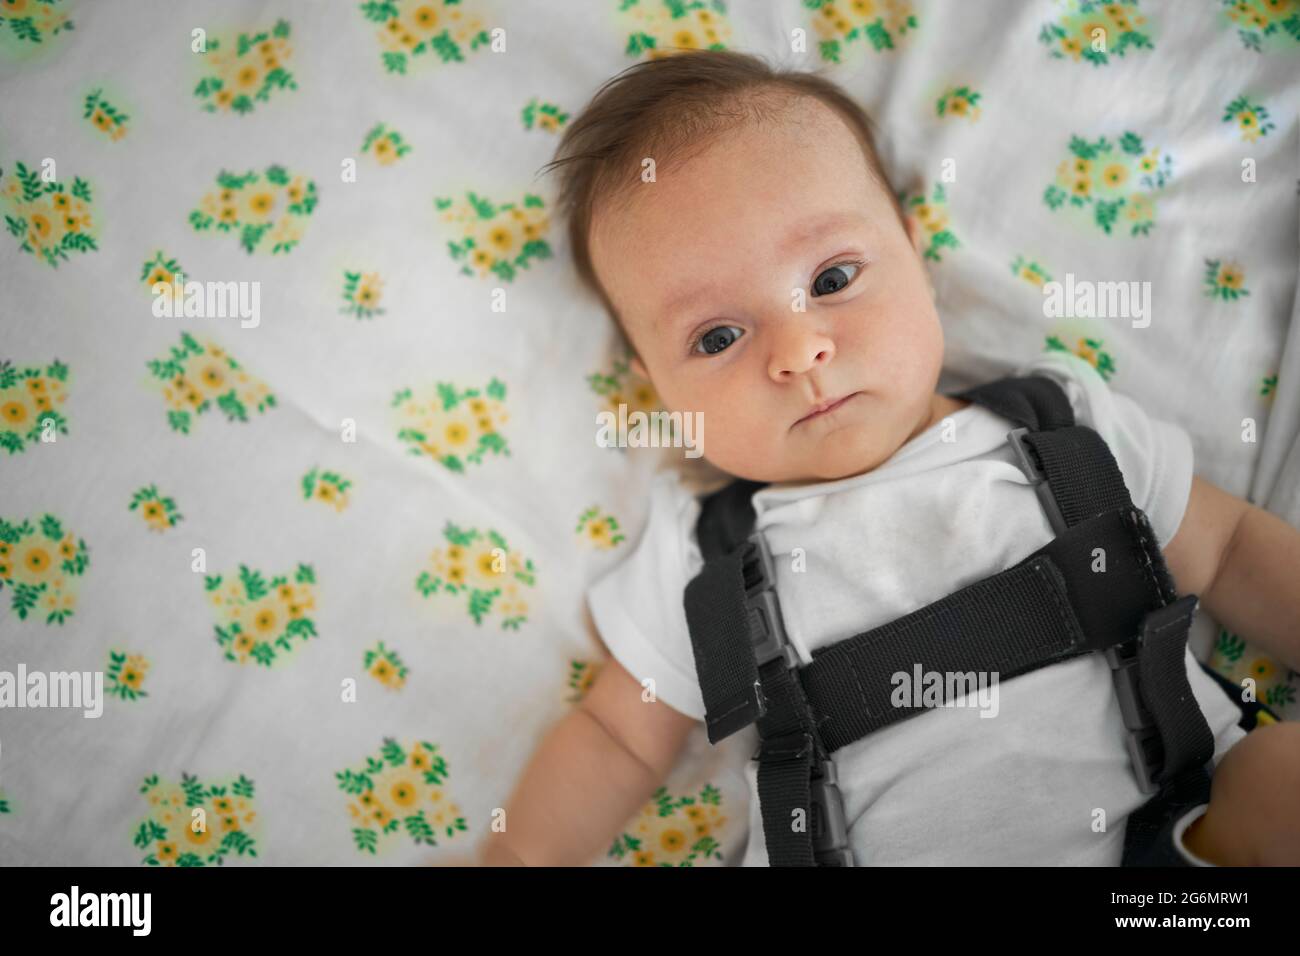 Portrait of a small baby girl Stock Photo